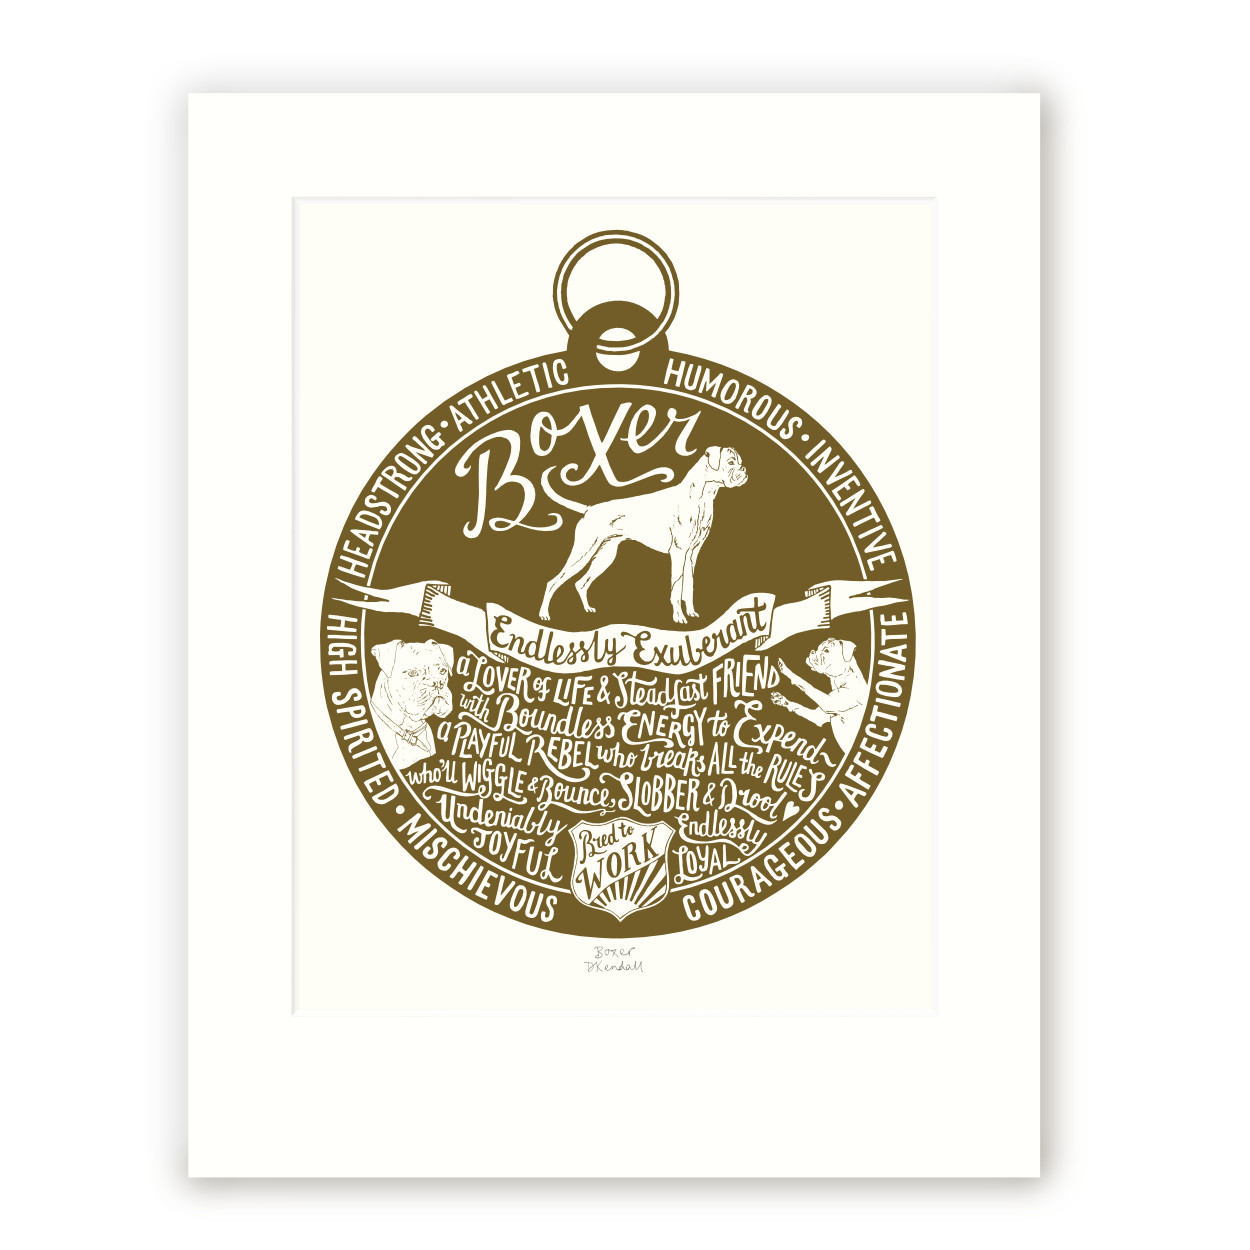 Hand printed boxer dog art sale | The Enlightened Hound